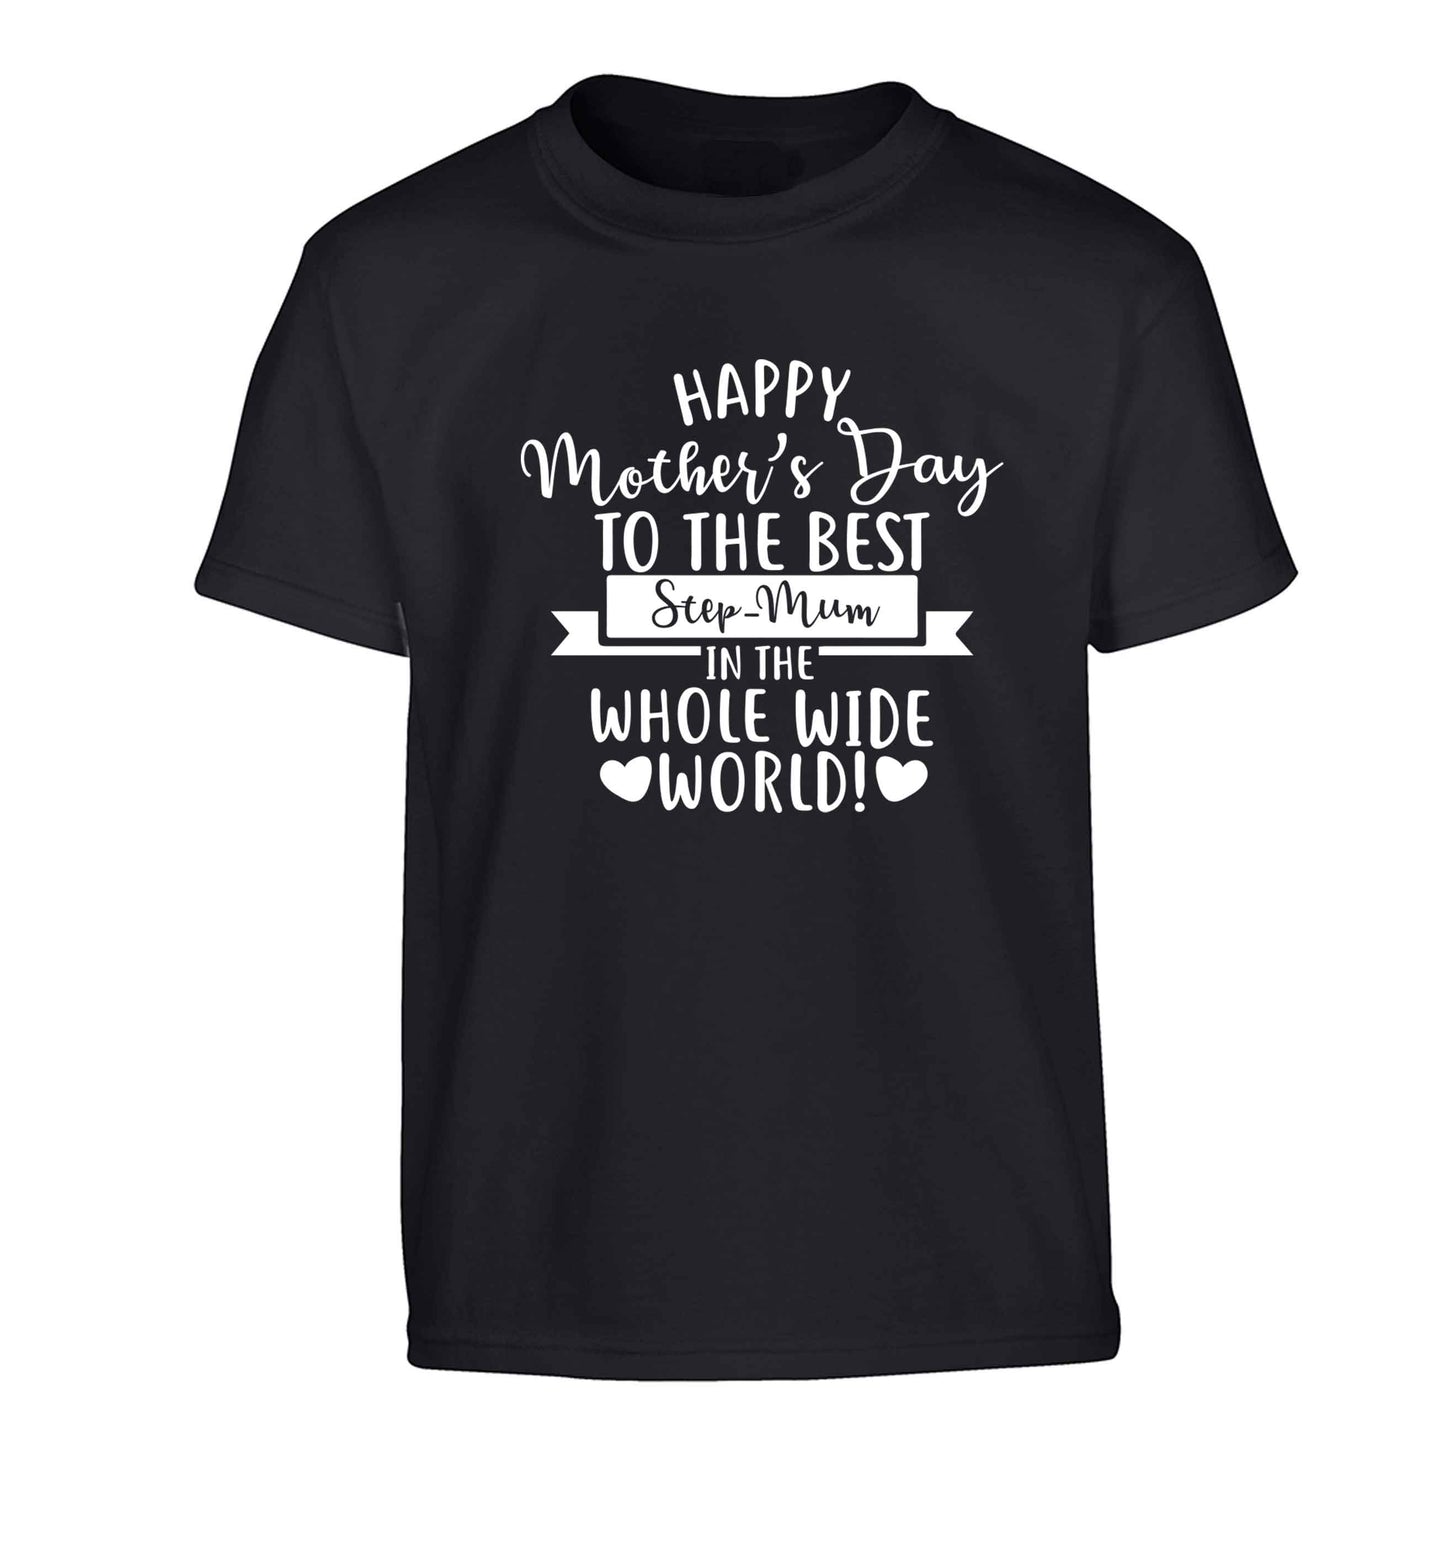 Happy mother's day to the best step-mum in the world Children's black Tshirt 12-13 Years